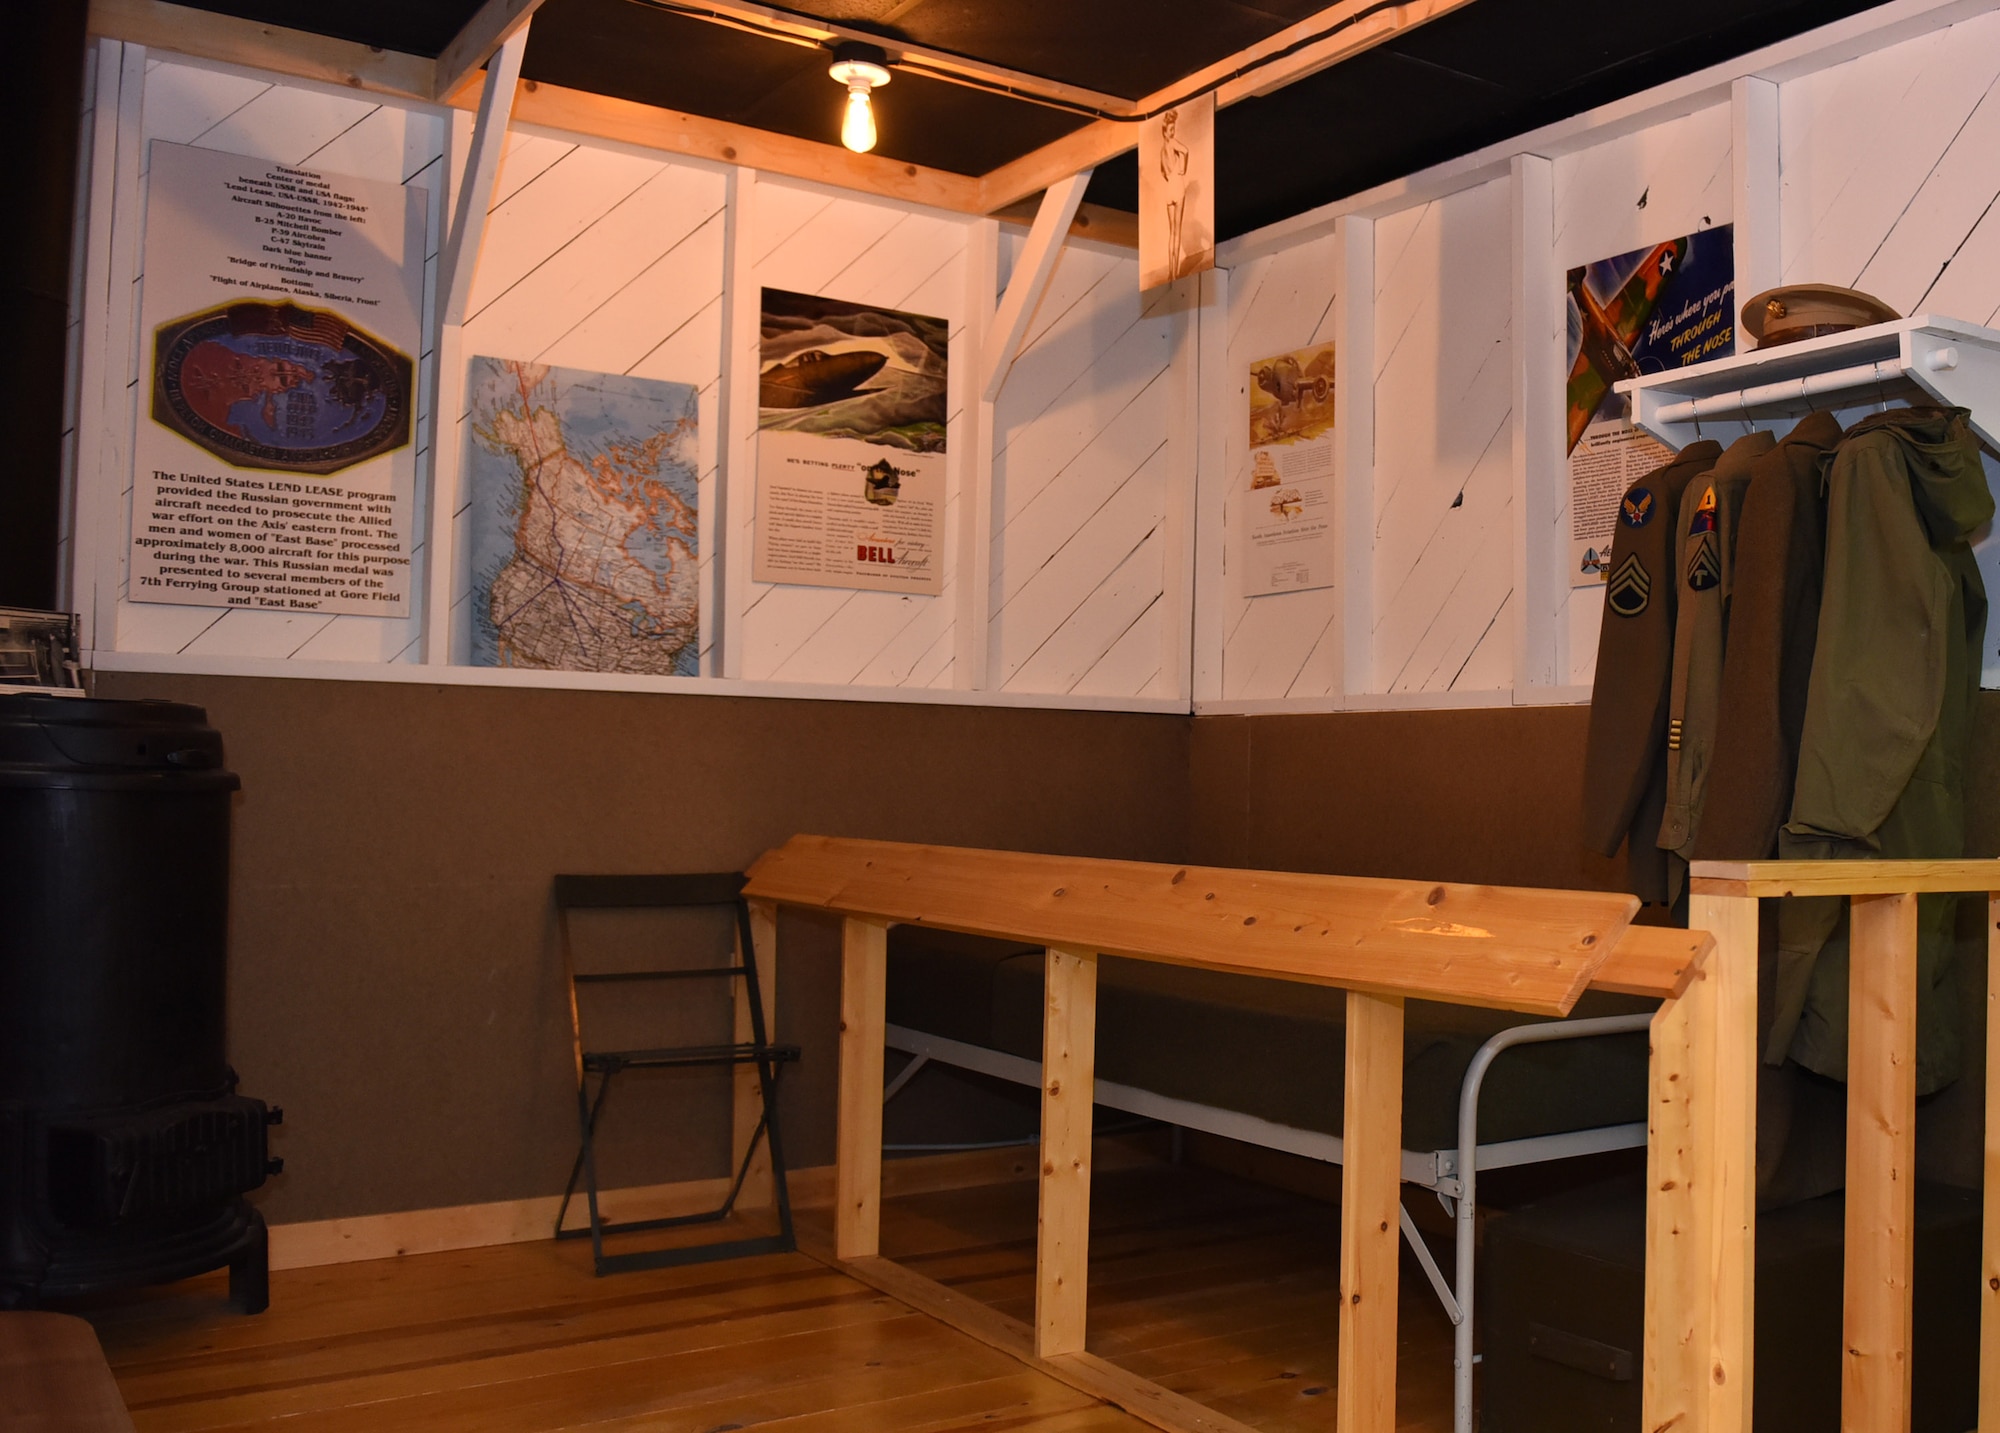 A mock-up of a World War II Army barrack is one of many exhibits on display at the Malmstrom Historic Exhibit and Air Park at Malmstrom Air Froce Base, Mont.  The museum contains more than 400 items on display that depict the history of Malmstrom and the Minuteman missile program.  (Air Force photo/Jason Heavner)